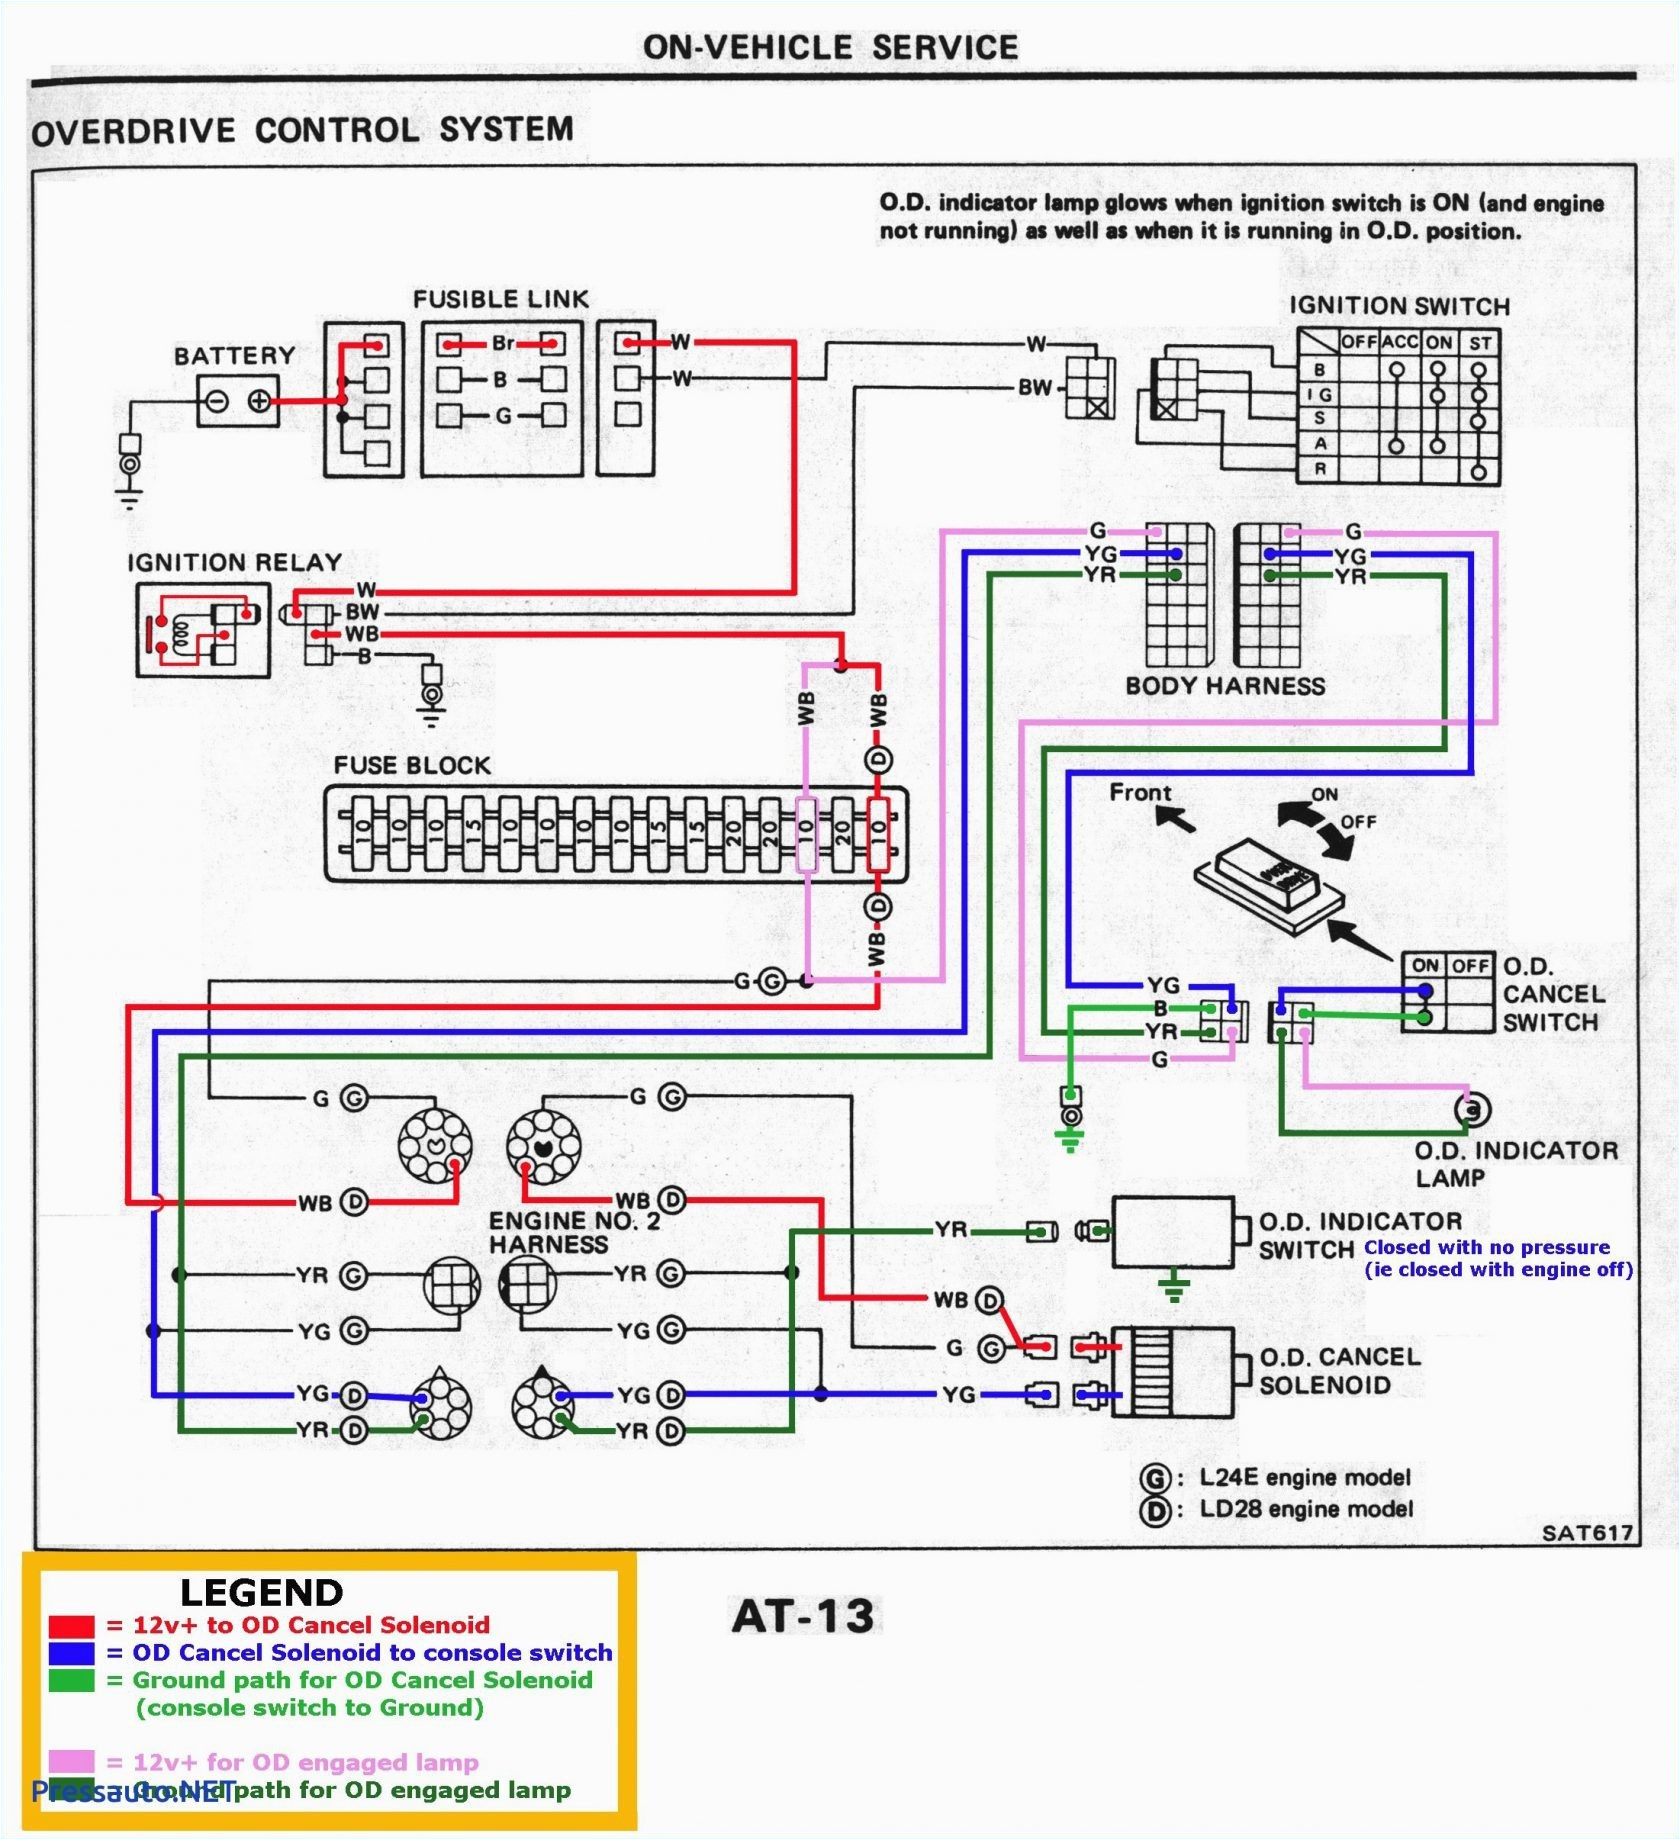 solid signal wiring diagrams wiring diagram usersound off signal wiring diagrams 15